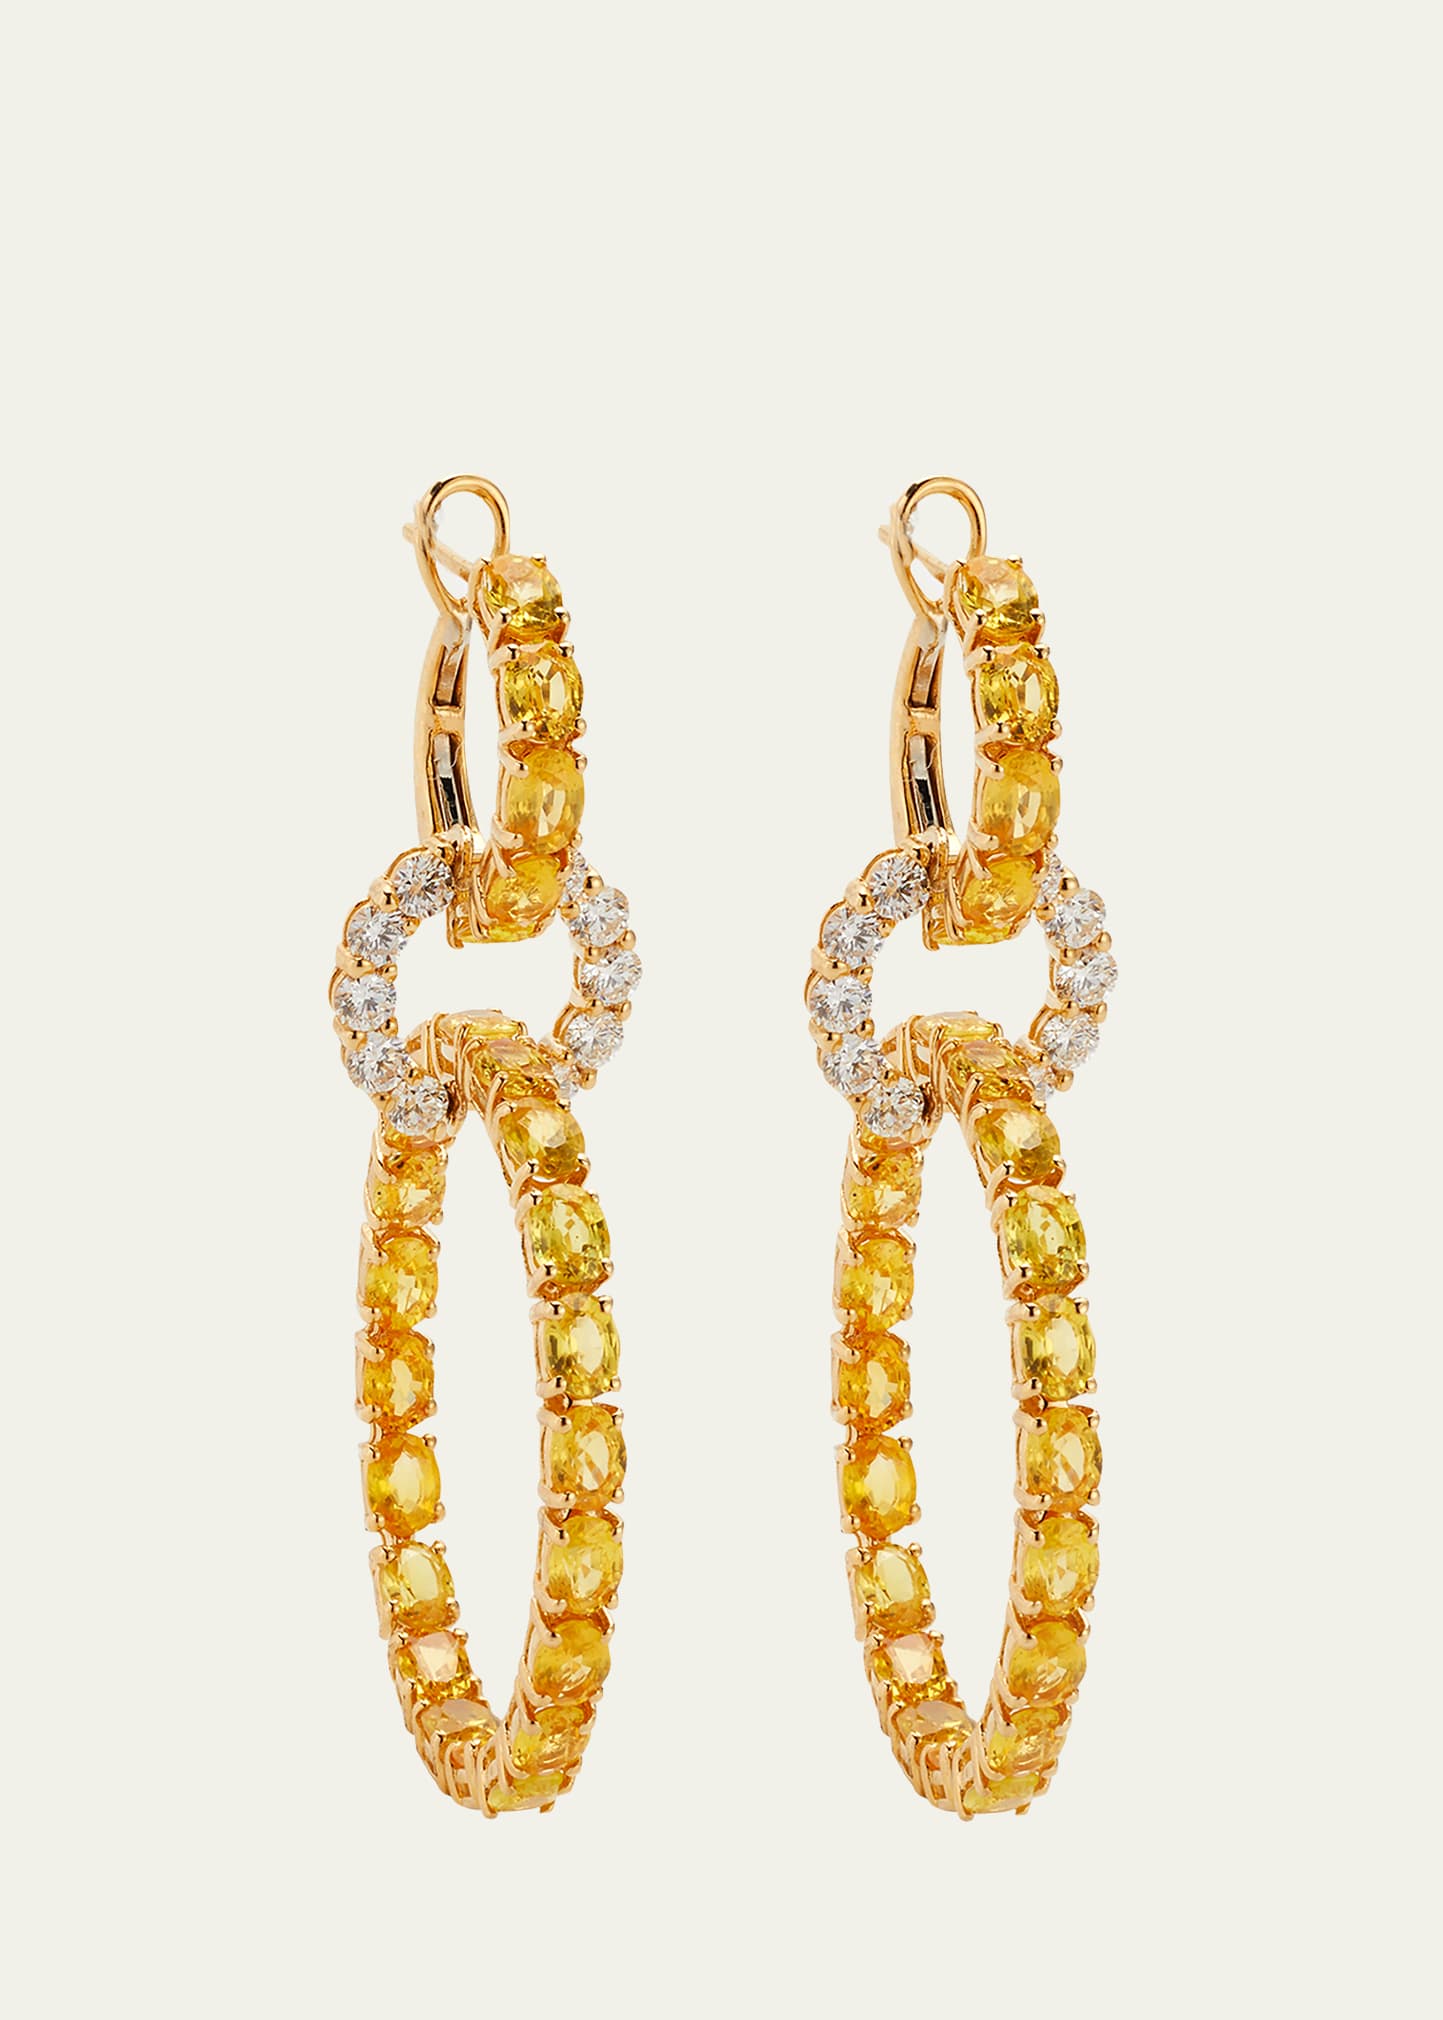 Yellow Gold Diamond and Yellow Sapphire Earrings from Hoops Collection